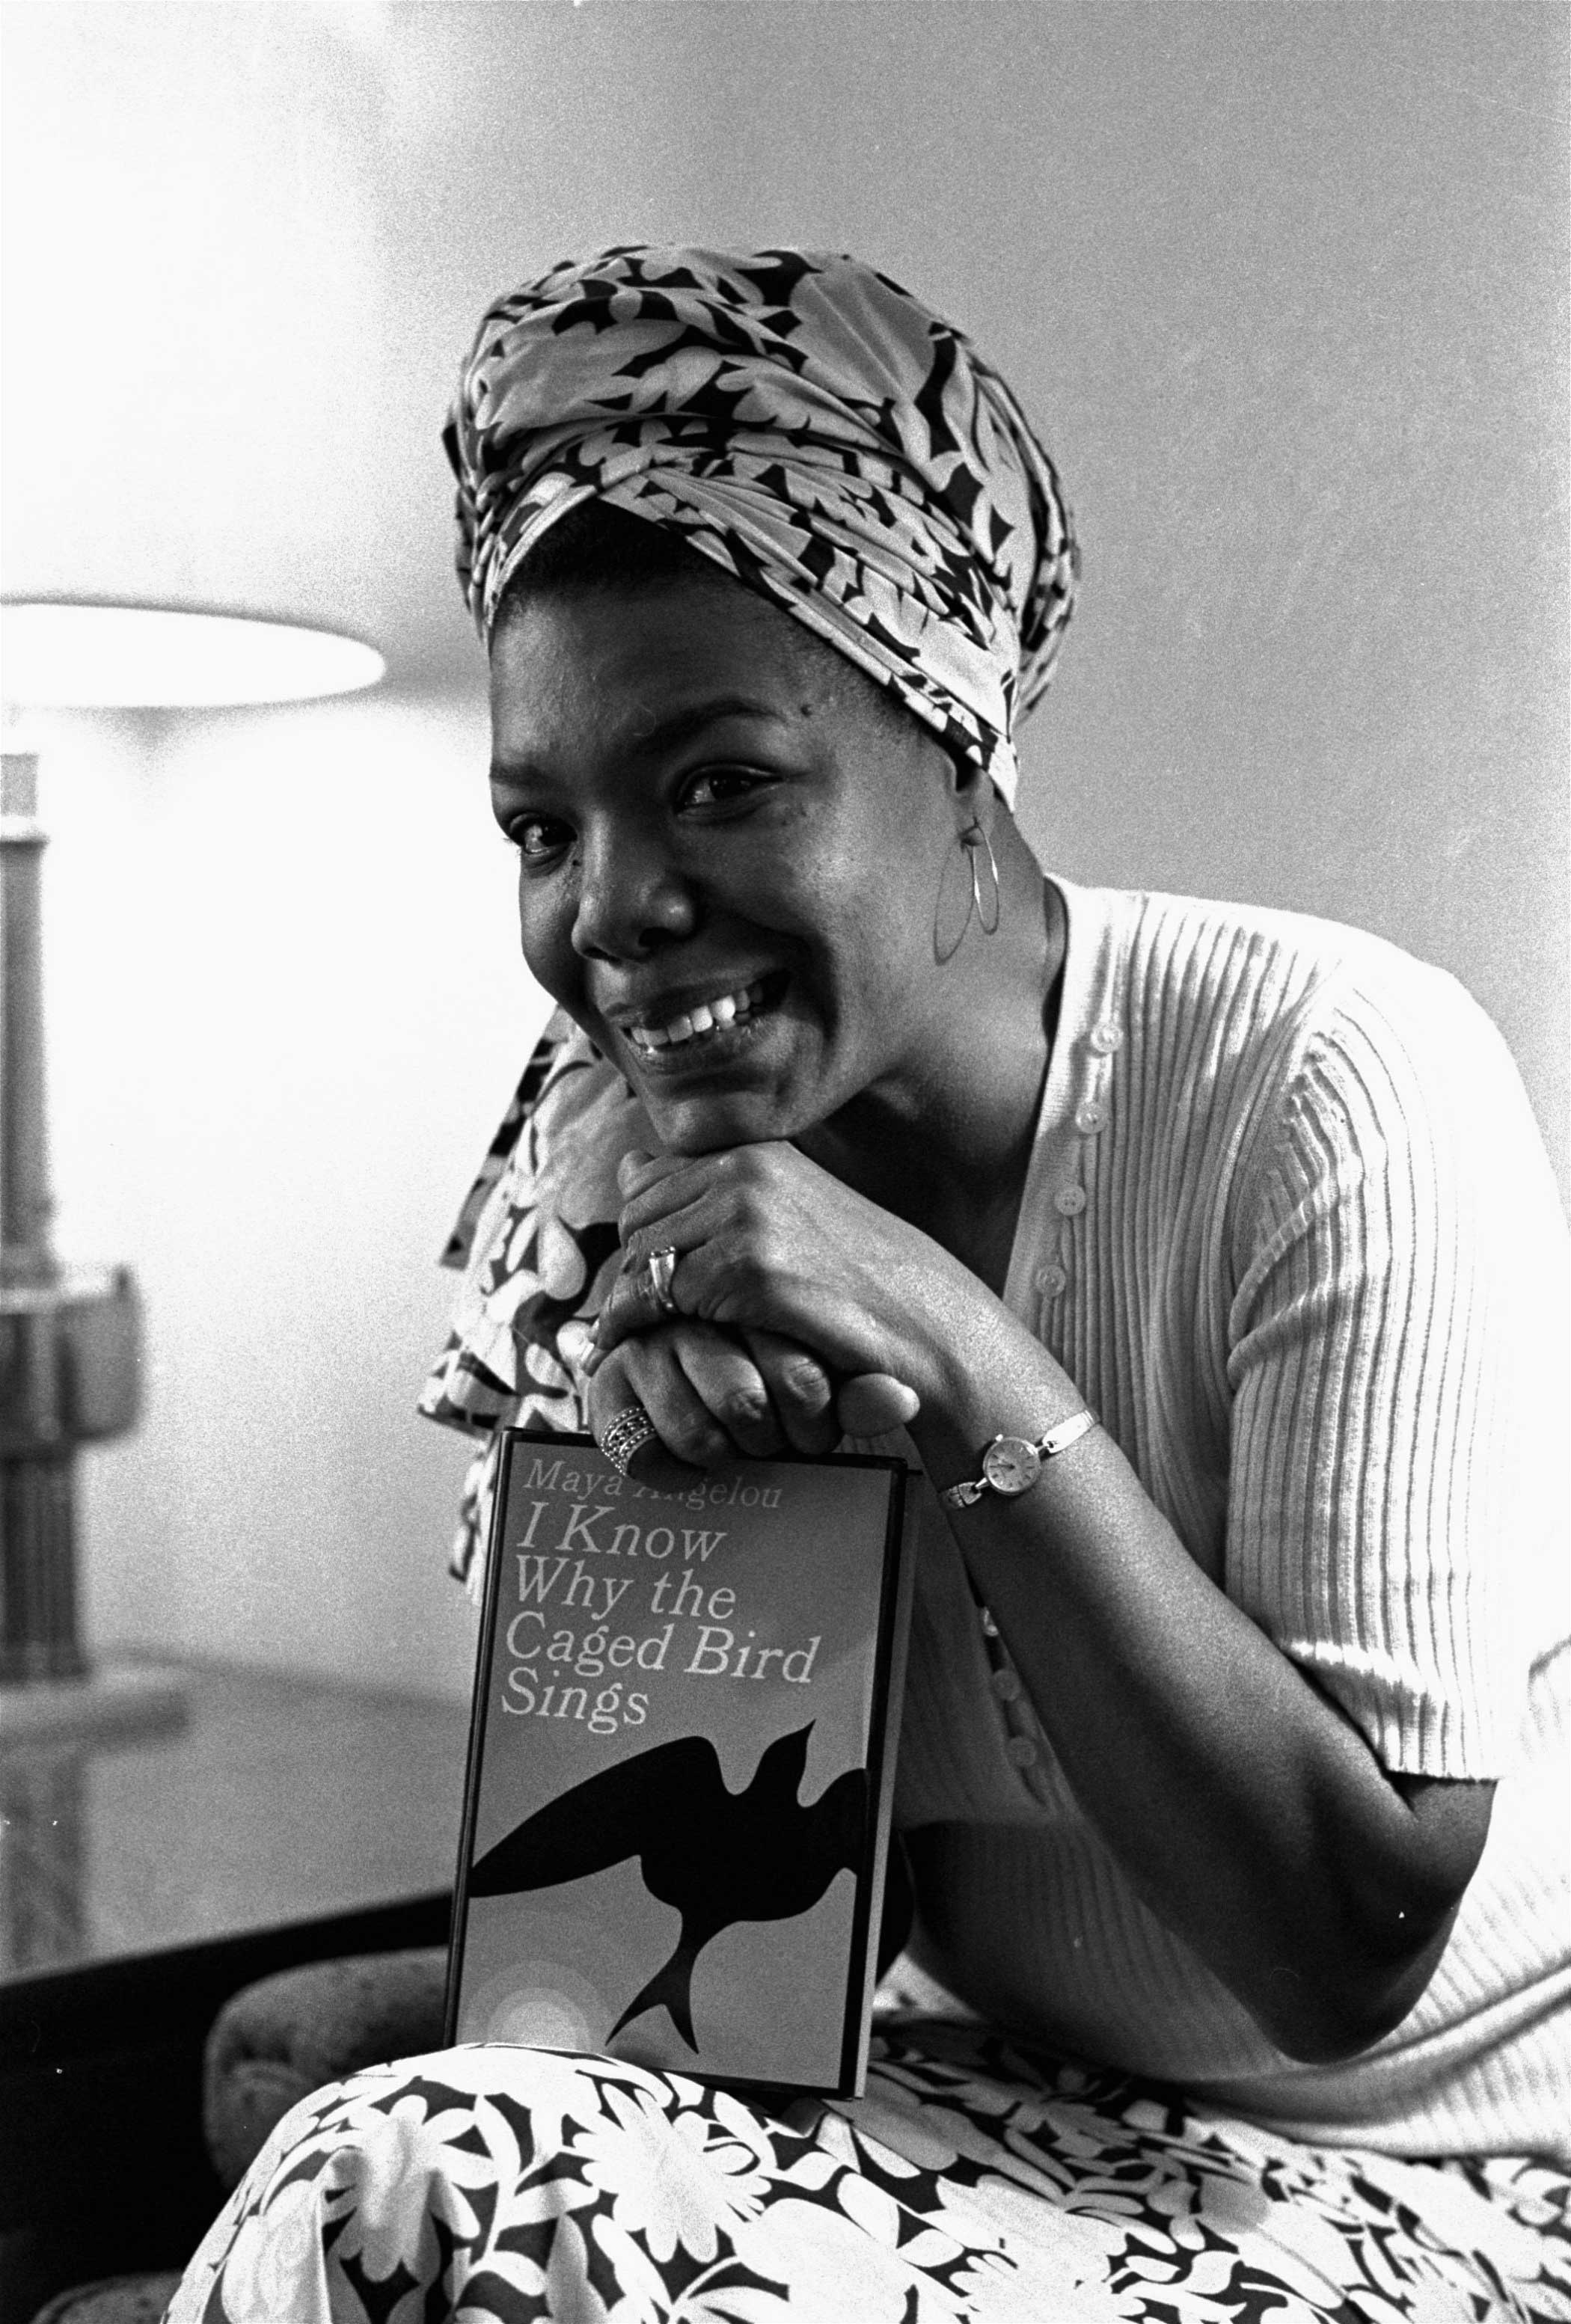 Maya Angelou with a copy of I Know Why the Caged Bird Sings on Nov. 3, 1971 in Hollywood, Calif.